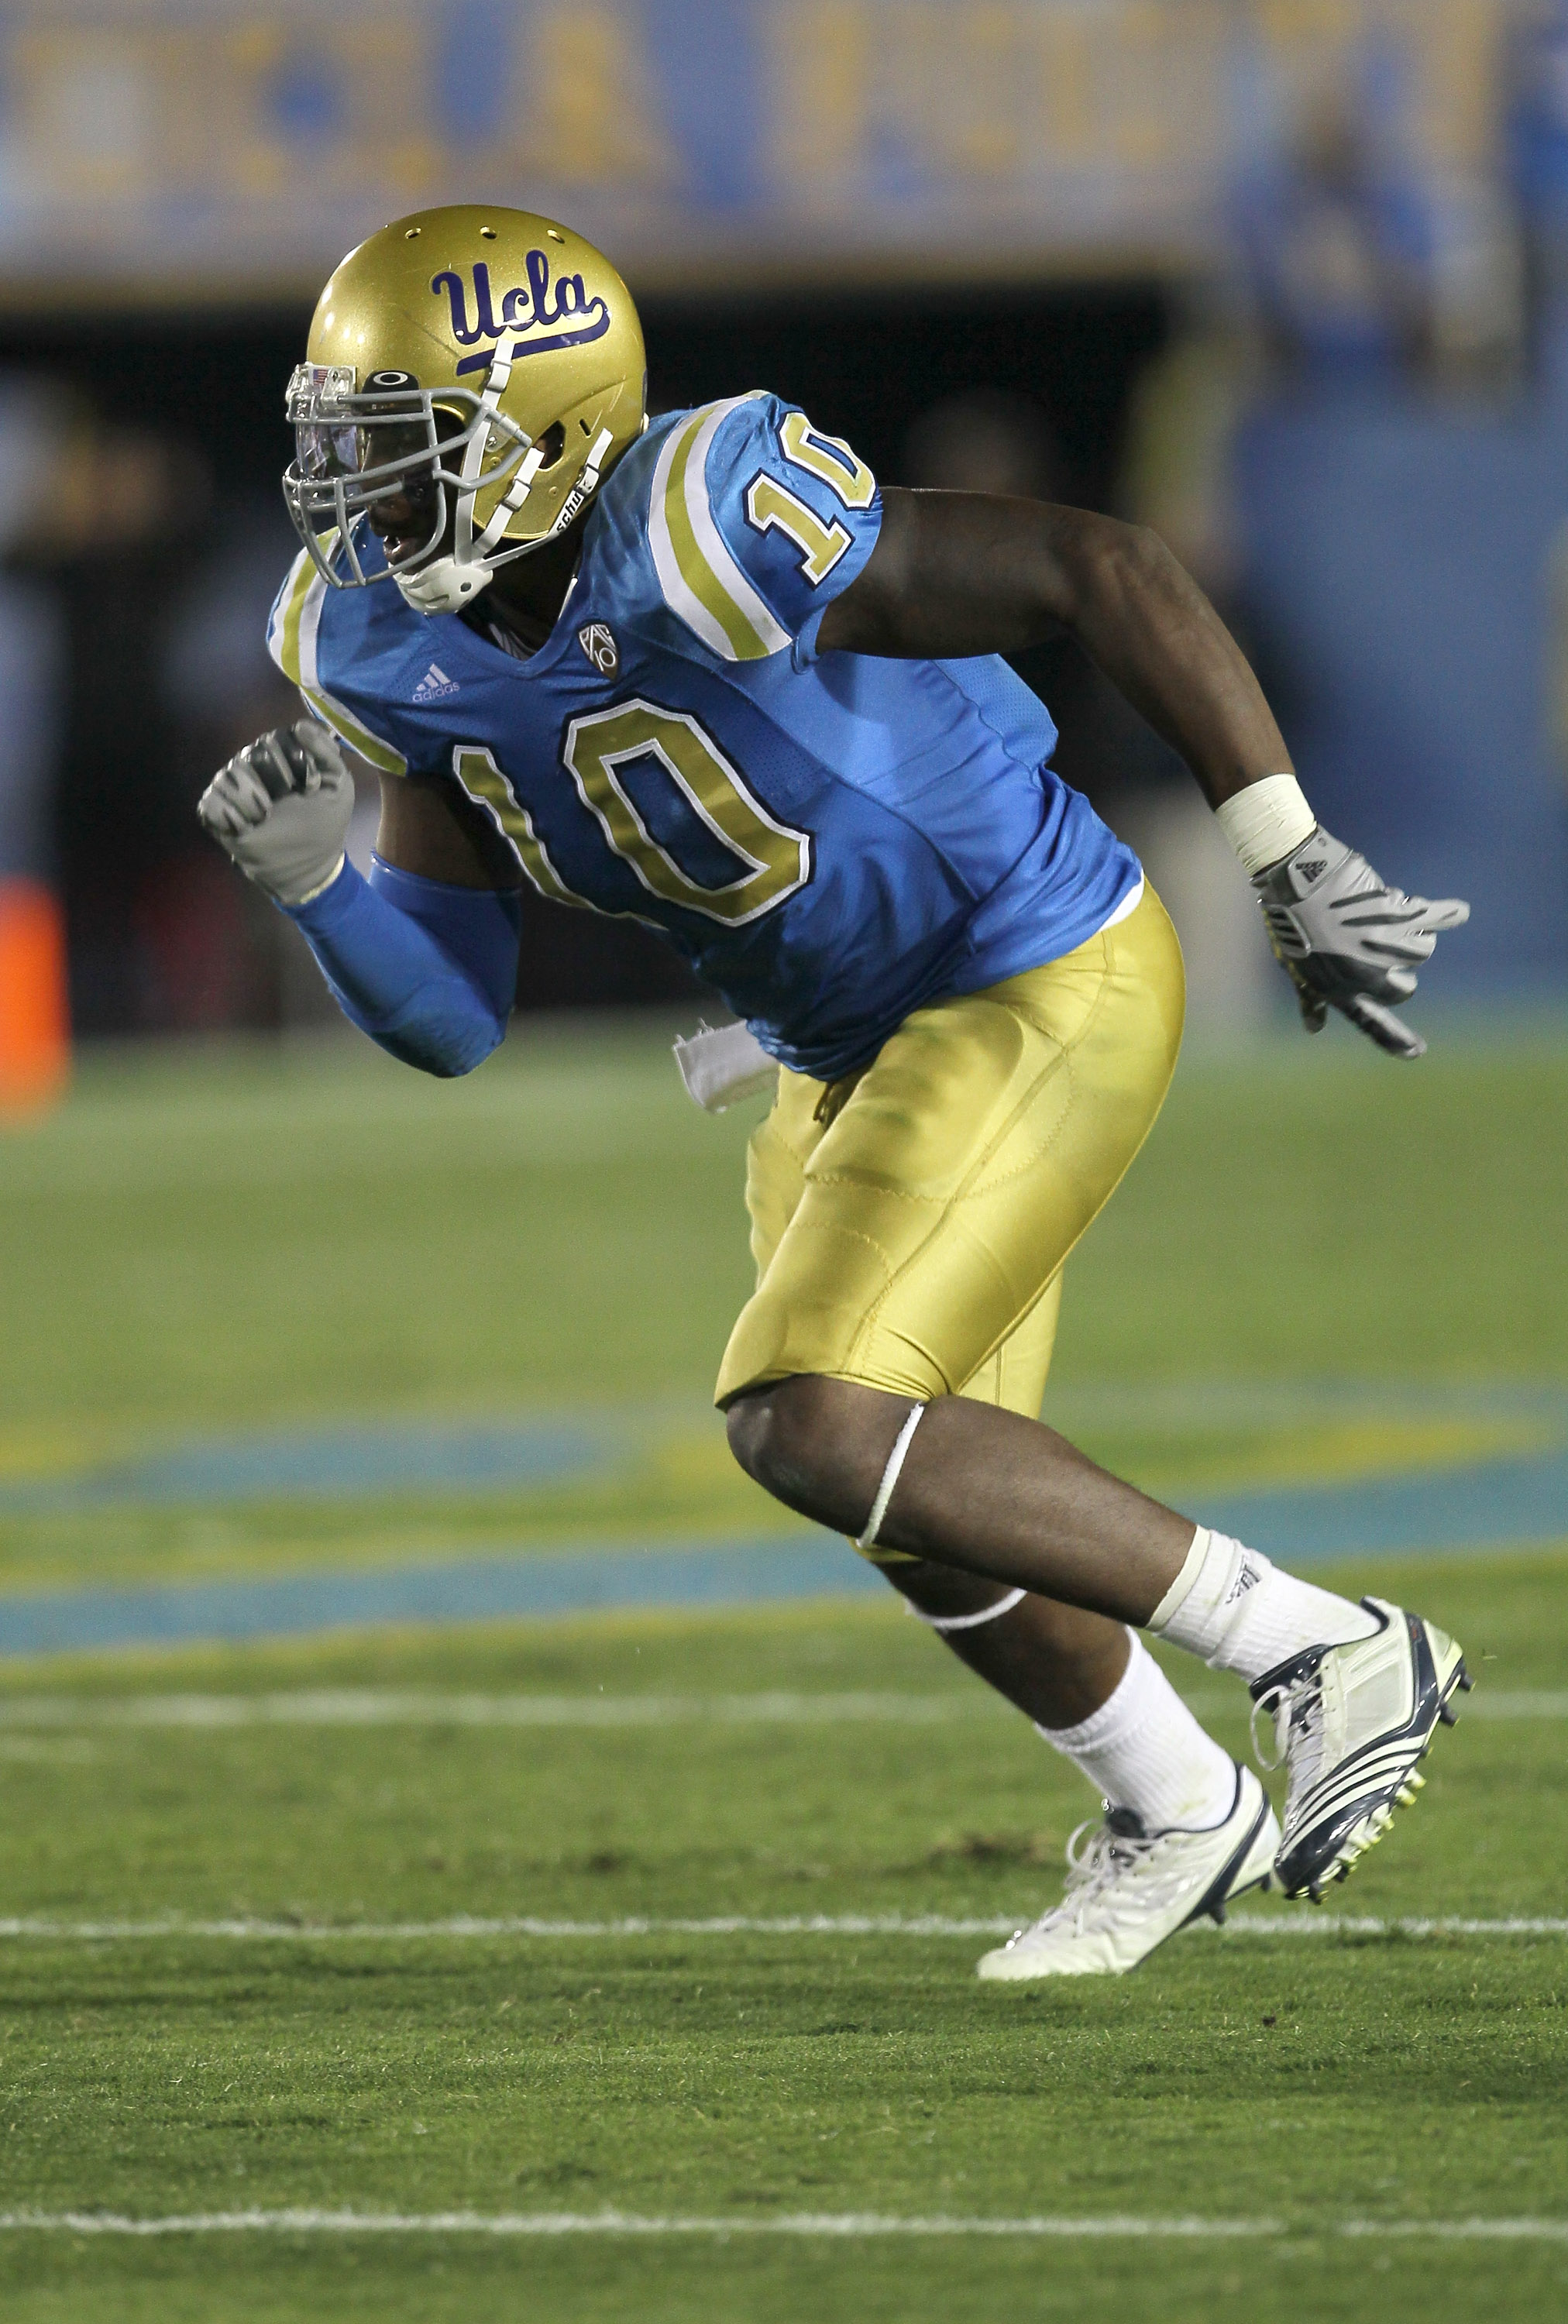 PASADENA, CA - SEPTEMBER 18:  Linebacker Akeem Ayers #10 of the UCLA Bruins in the game with the Houston Cougars at the Rose Bowl on September 18, 2010 in Pasadena, California.  UCLA won 31-13.  (Photo by Stephen Dunn/Getty Images)